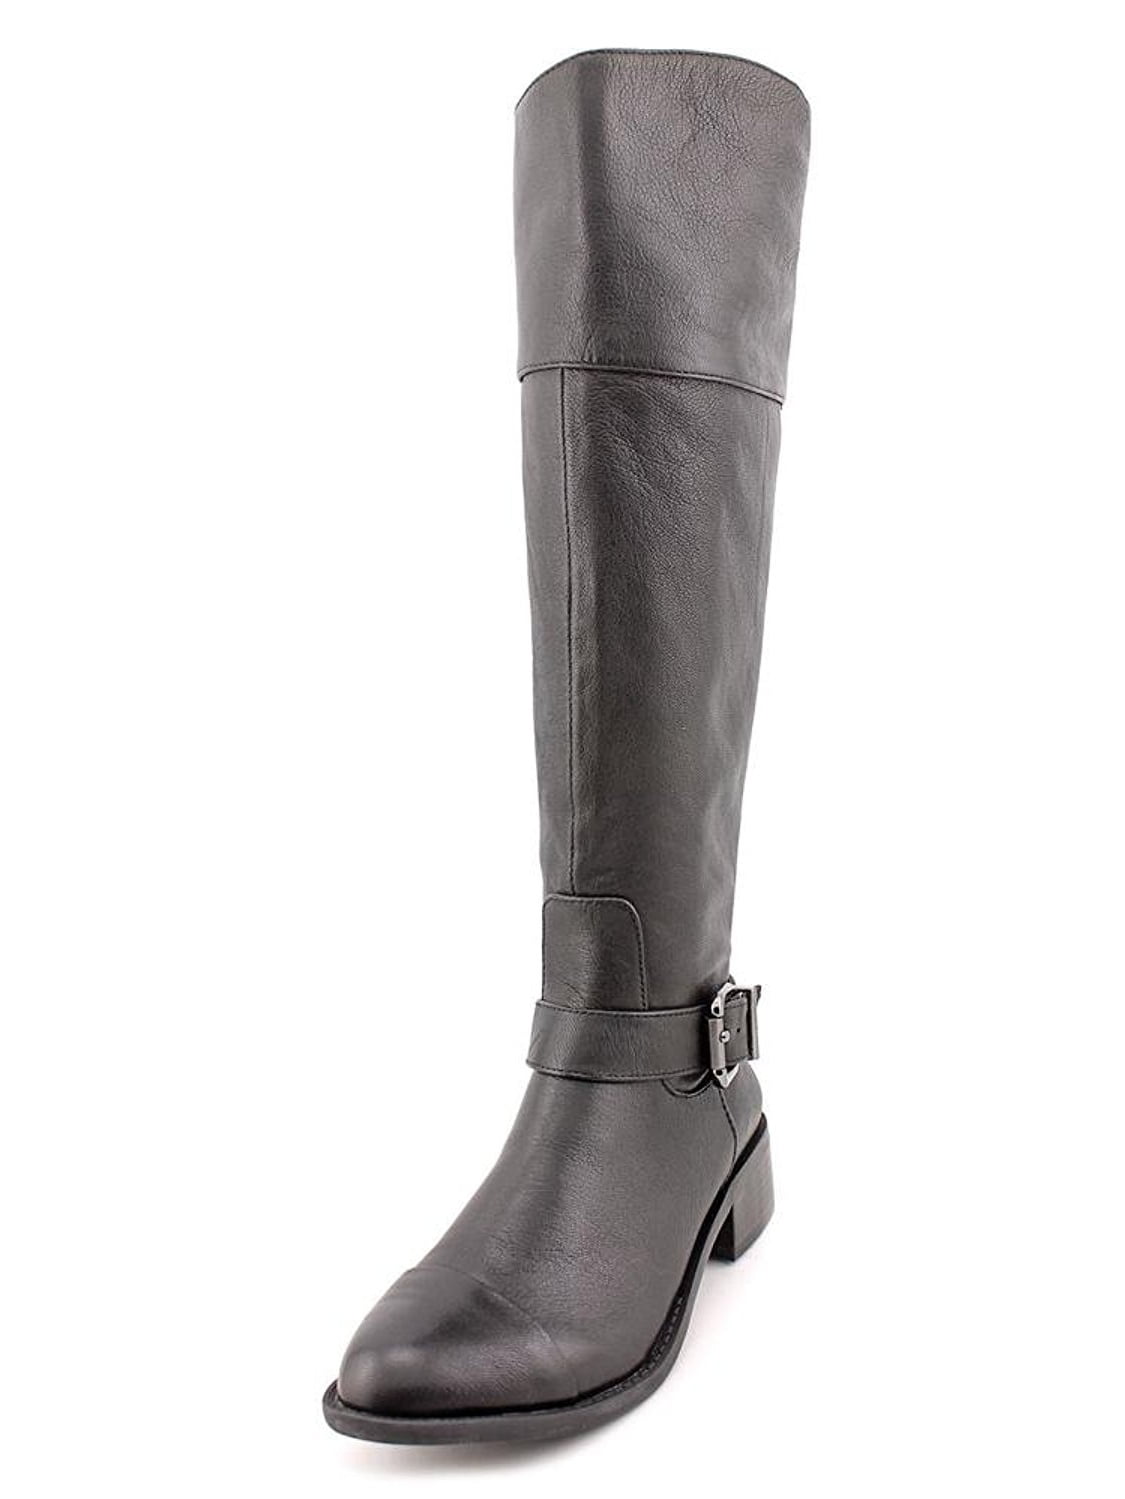 Vince Camuto - Vince Camuto Leisha Women's Knee High Riding Boots ...